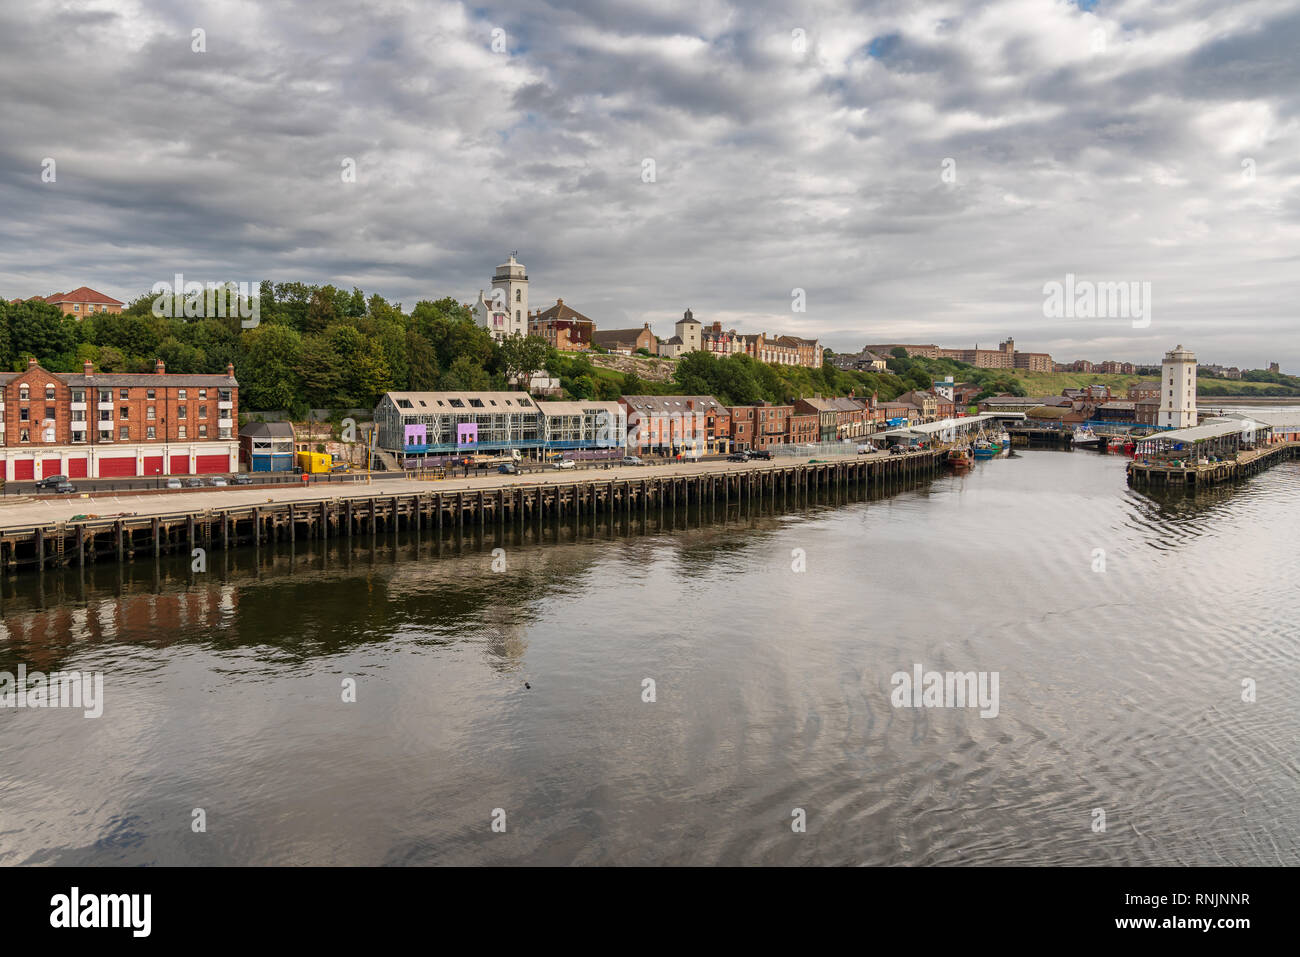 North Shields, Tyne and Wear, England, UK - September 05, 2018: View from the River Tyne at the North Shields Fish Market Stock Photo